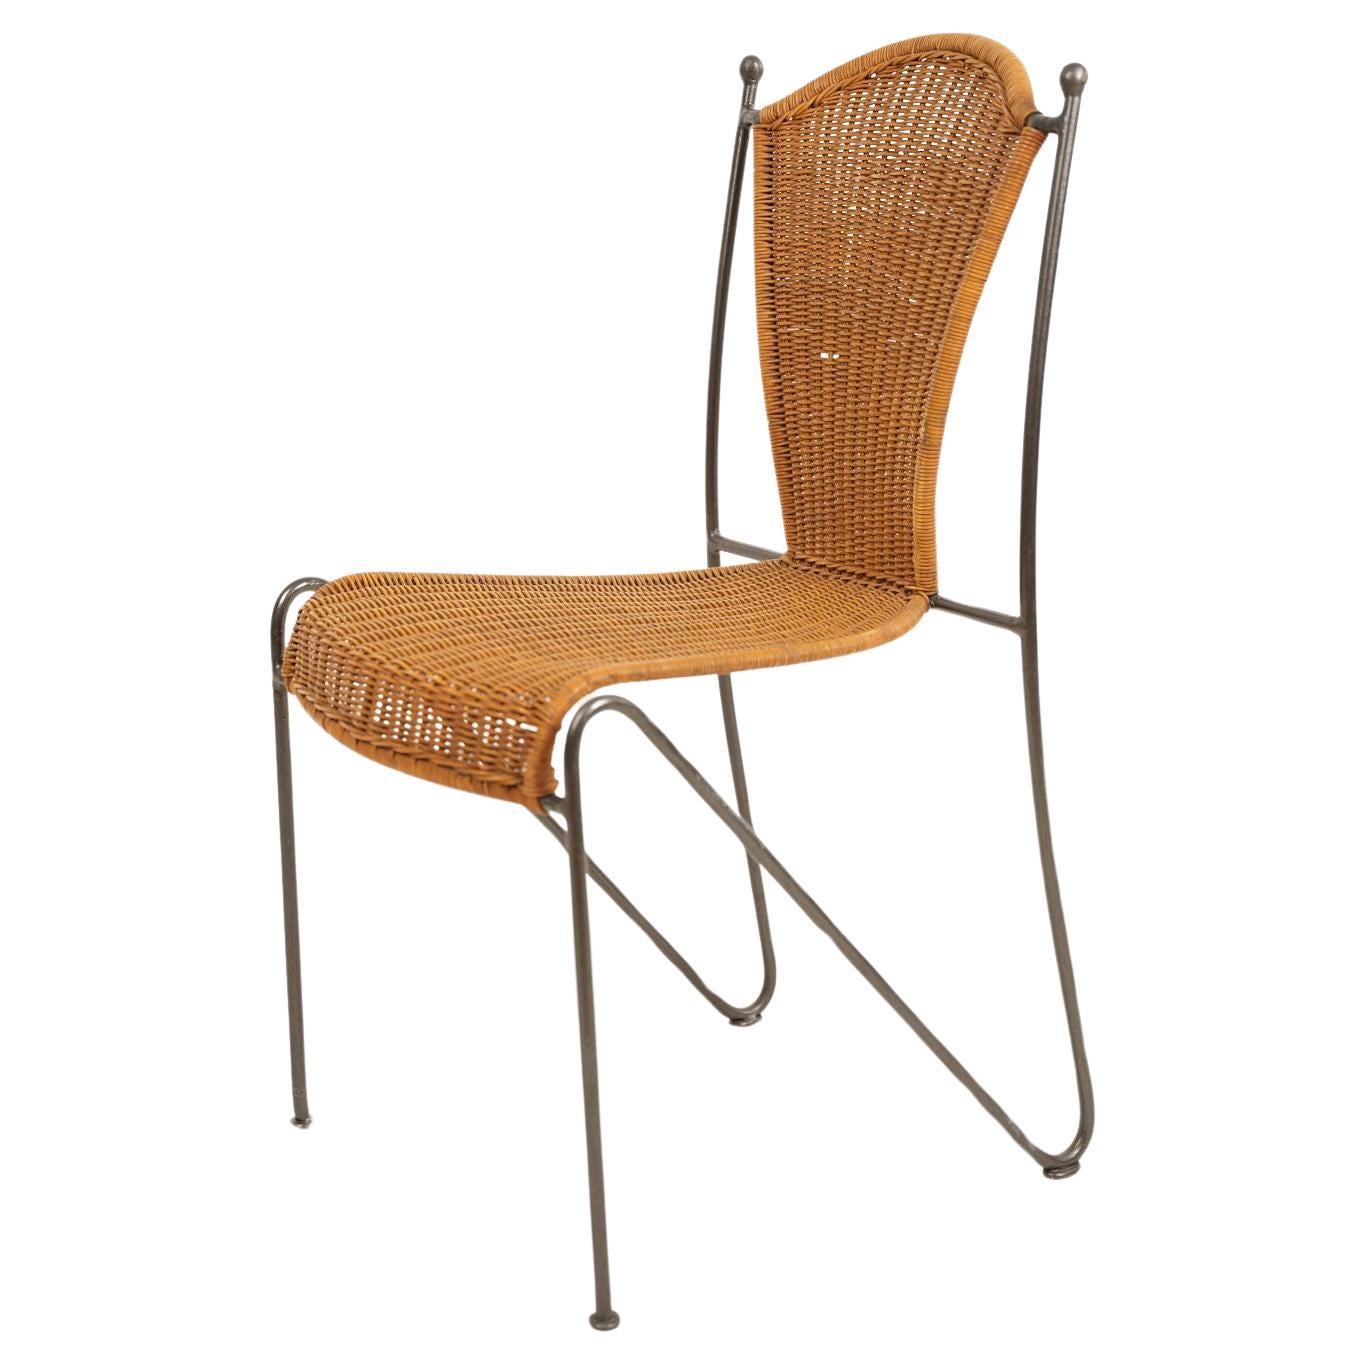 Wicker and Iron Chair By Frederic Weinberg 1950s